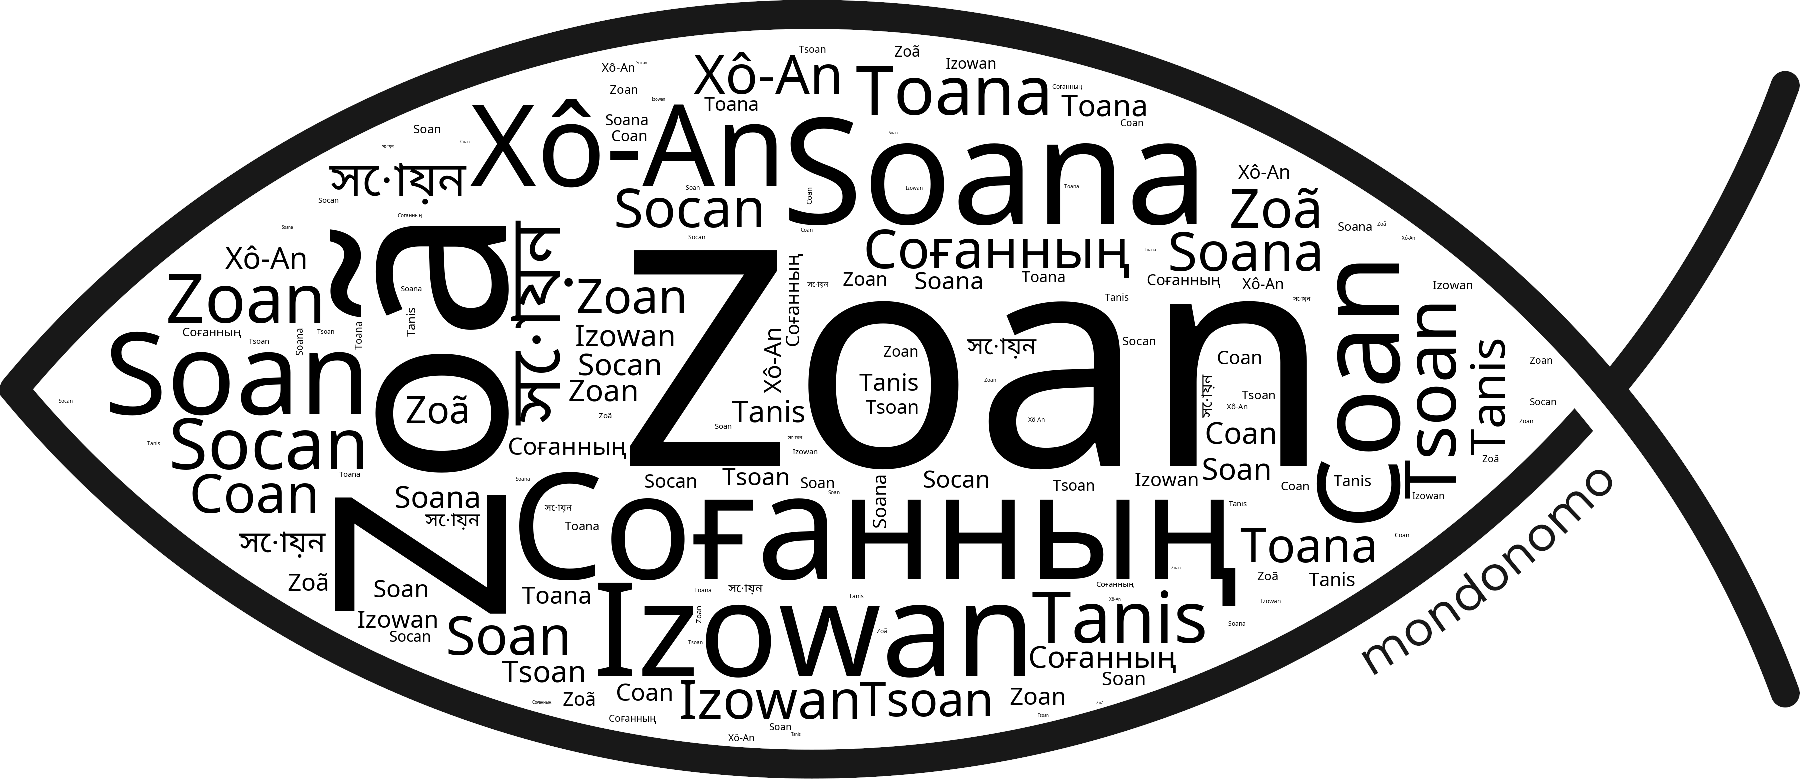 Name Zoan in the world's Bibles